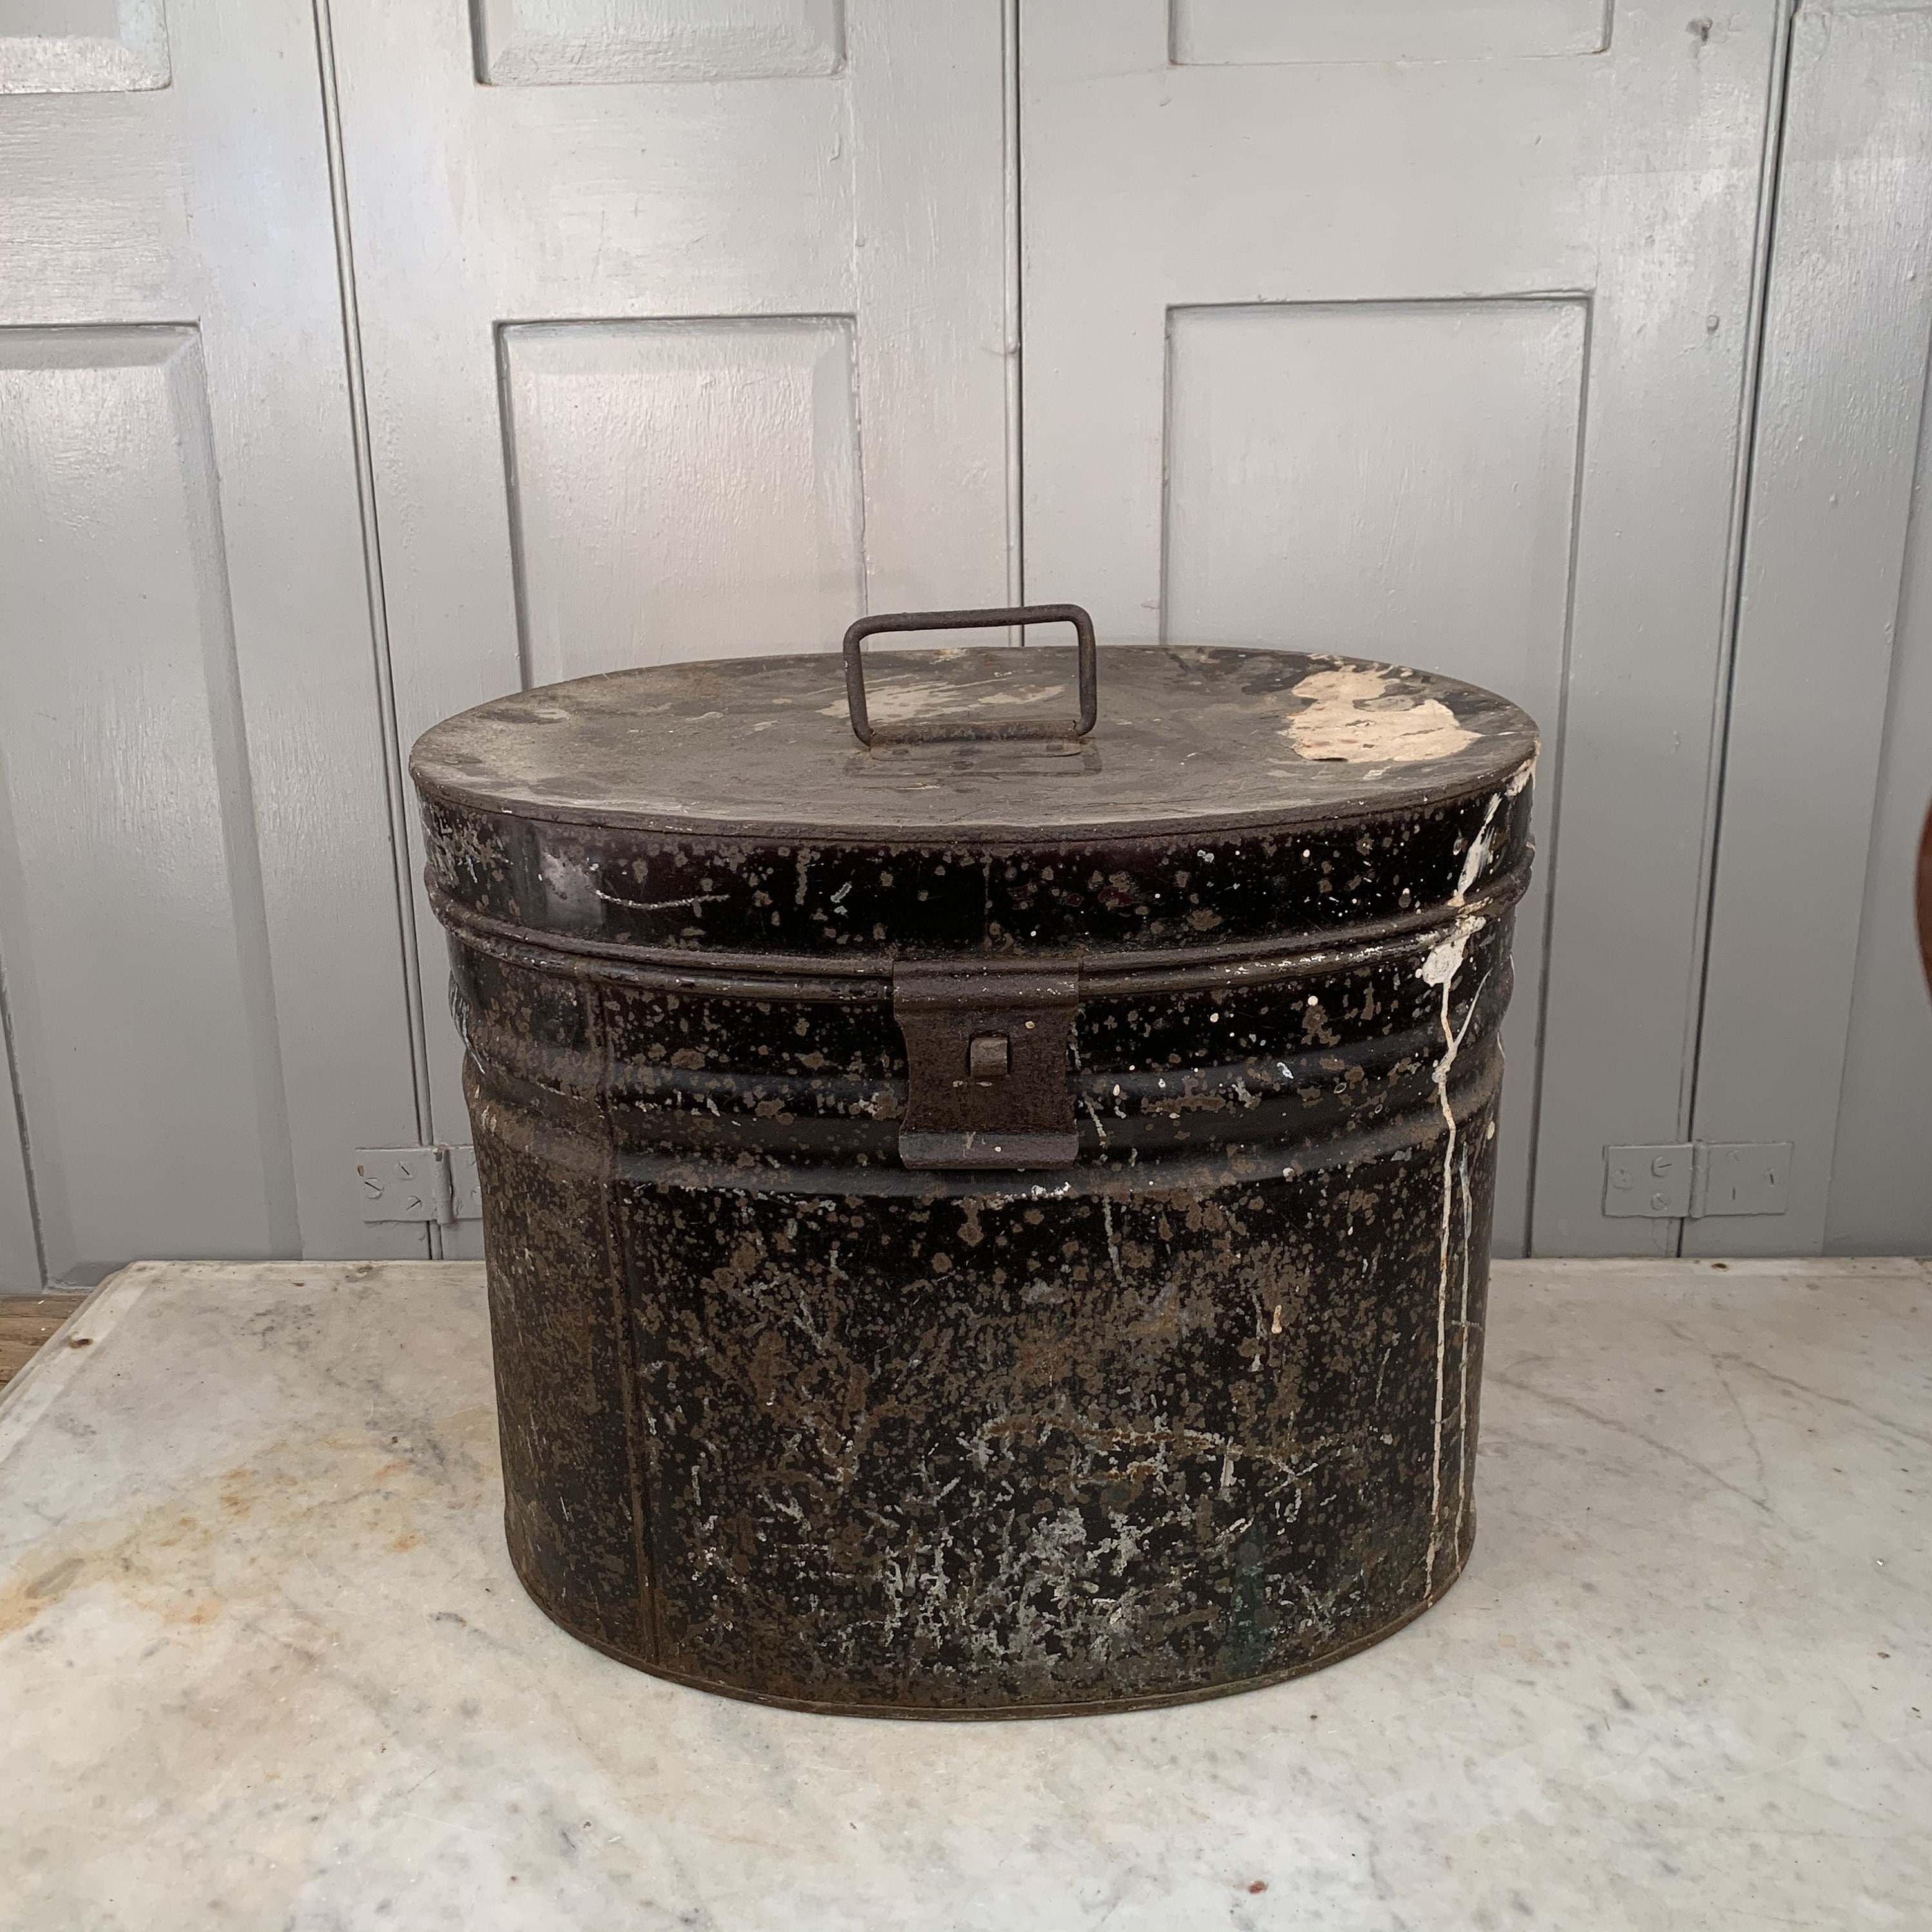 Antique Victorian Metal Hat Box C1900s With Handwritten Tag 